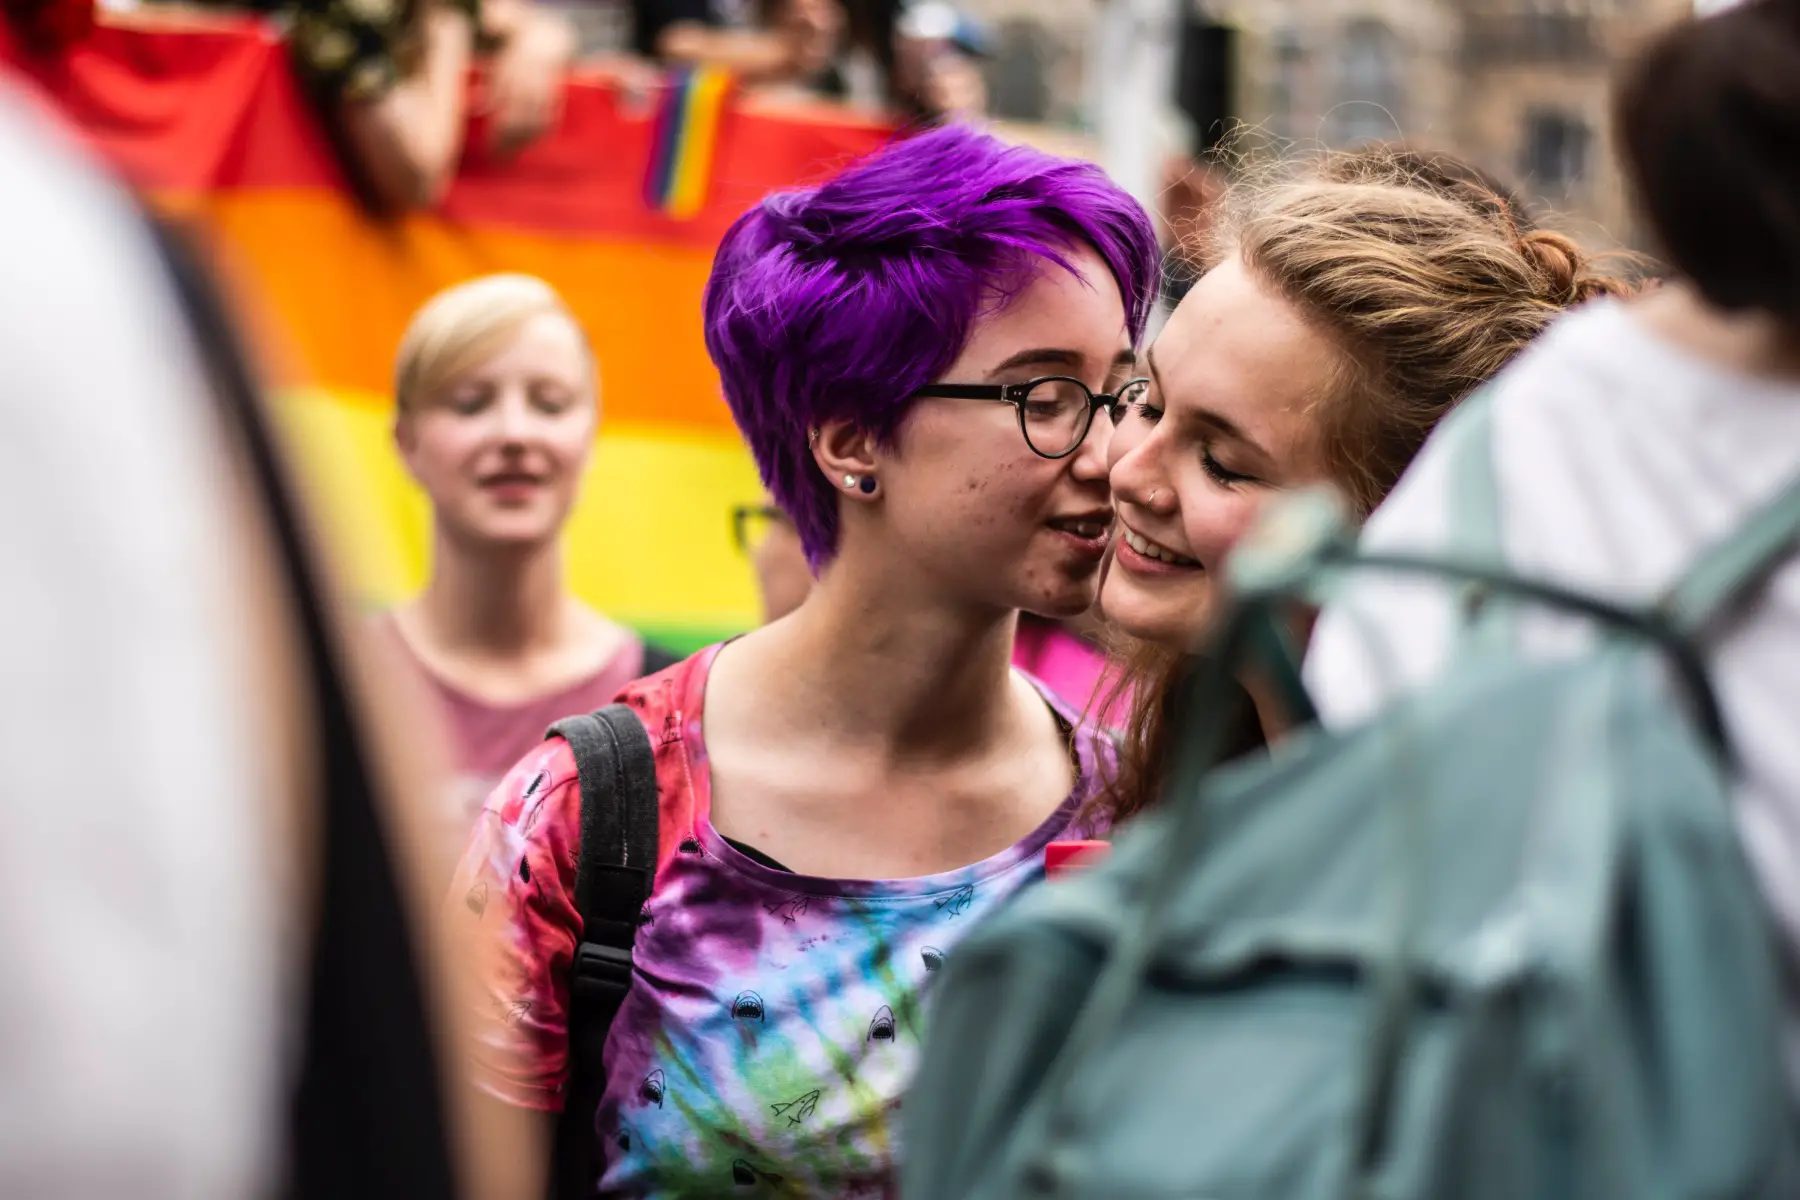 a close-up shot of a female same-sex couple affectionately cuddling during Pride festival